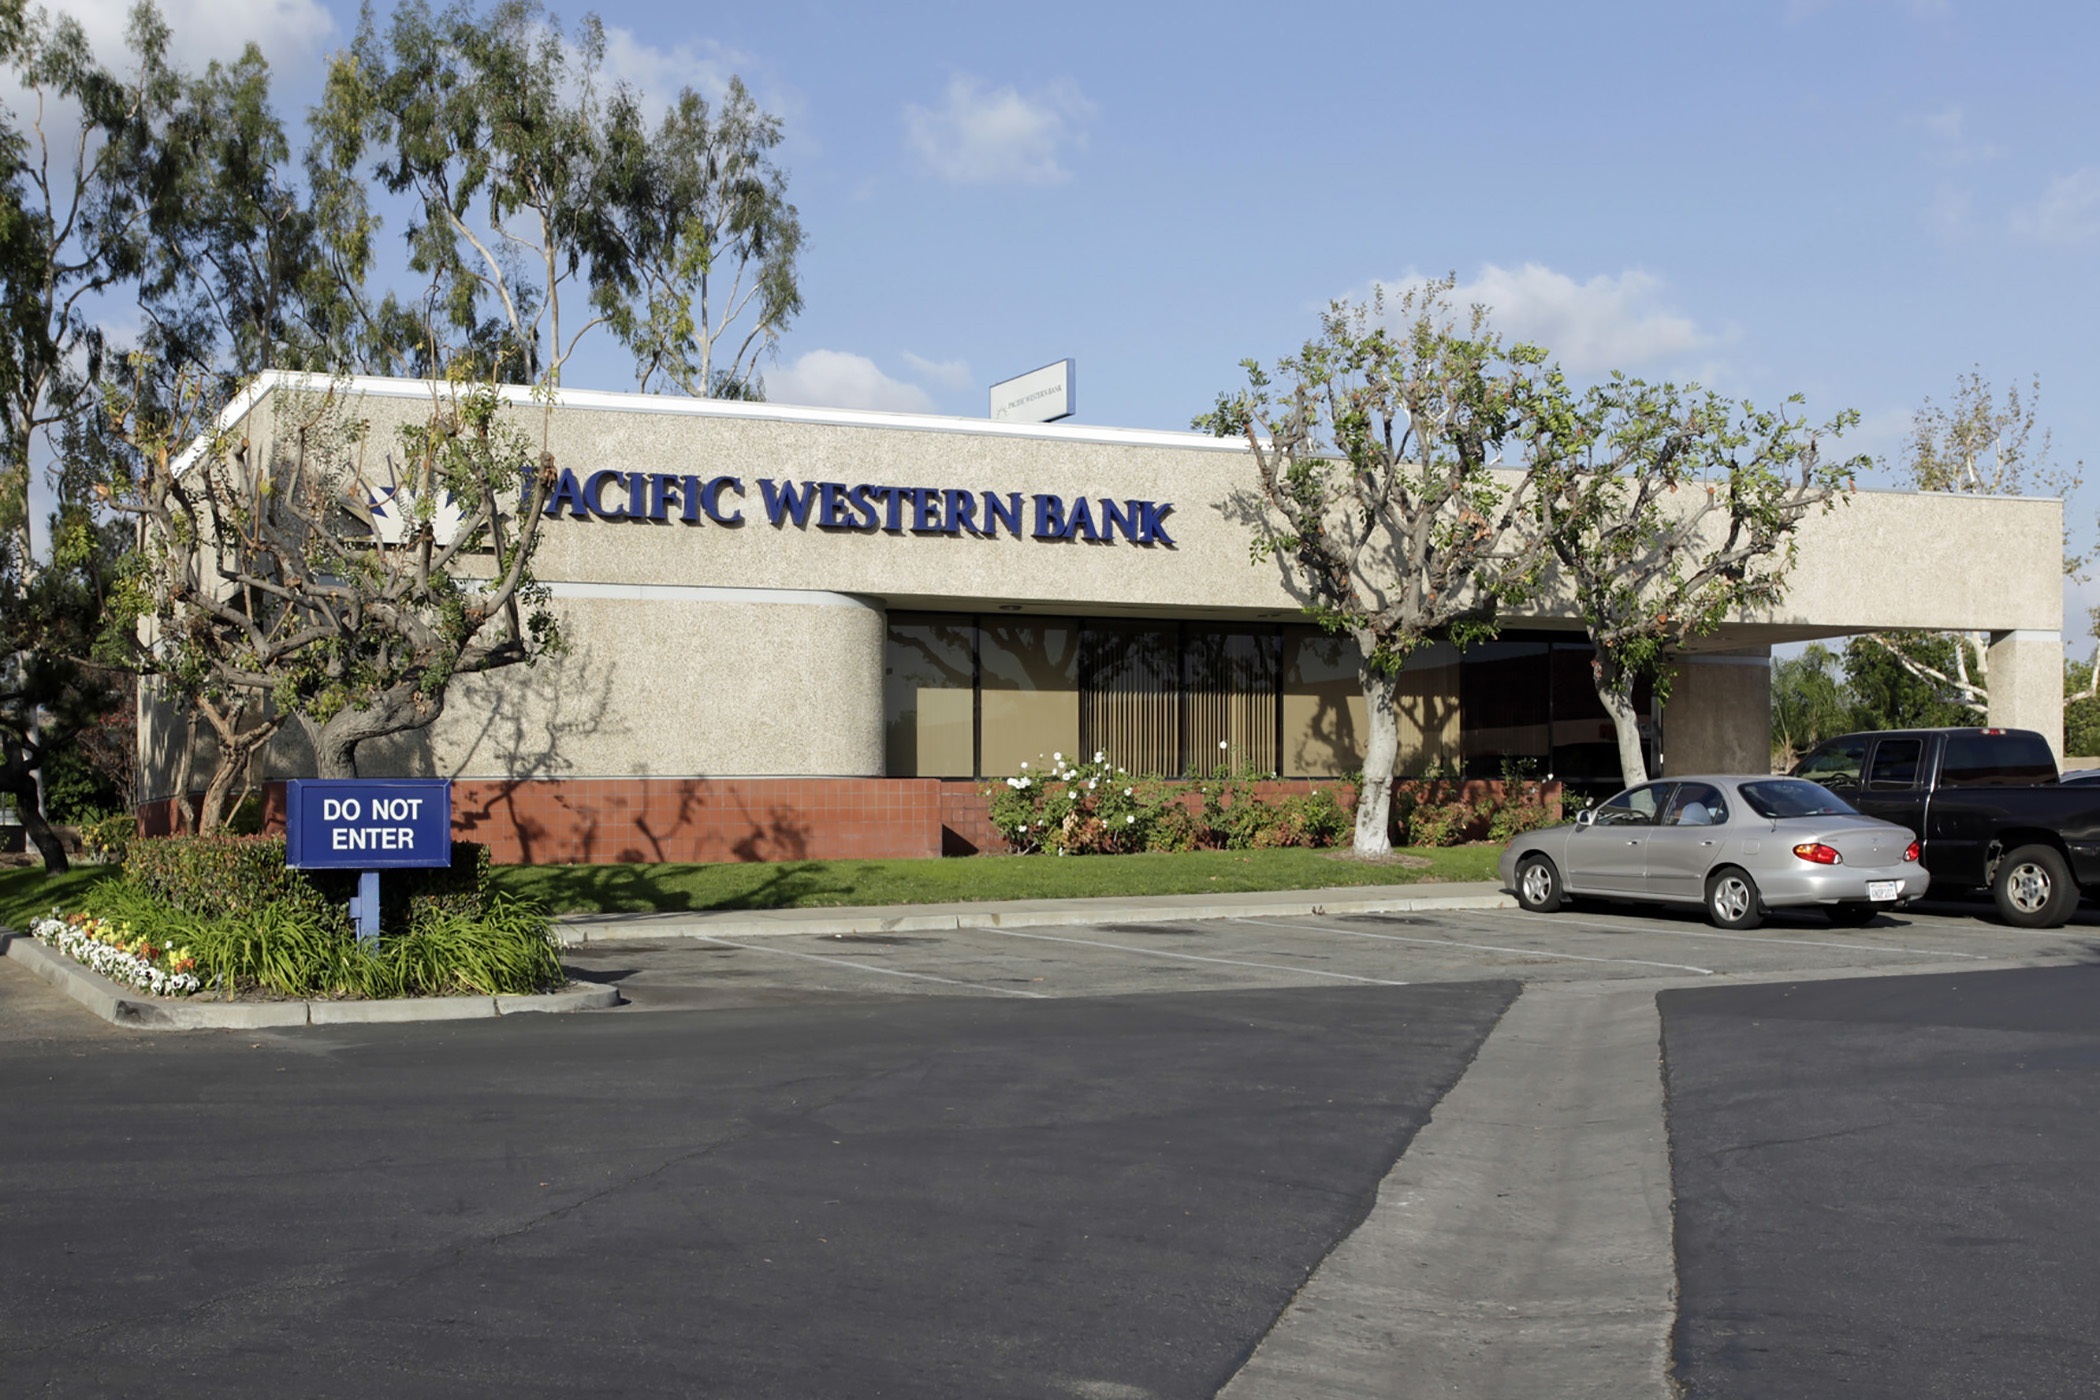 Pacific Western Bank agreed to sell a real estate construction loan portfolio as it explores ways to raise capital. (CoStar)